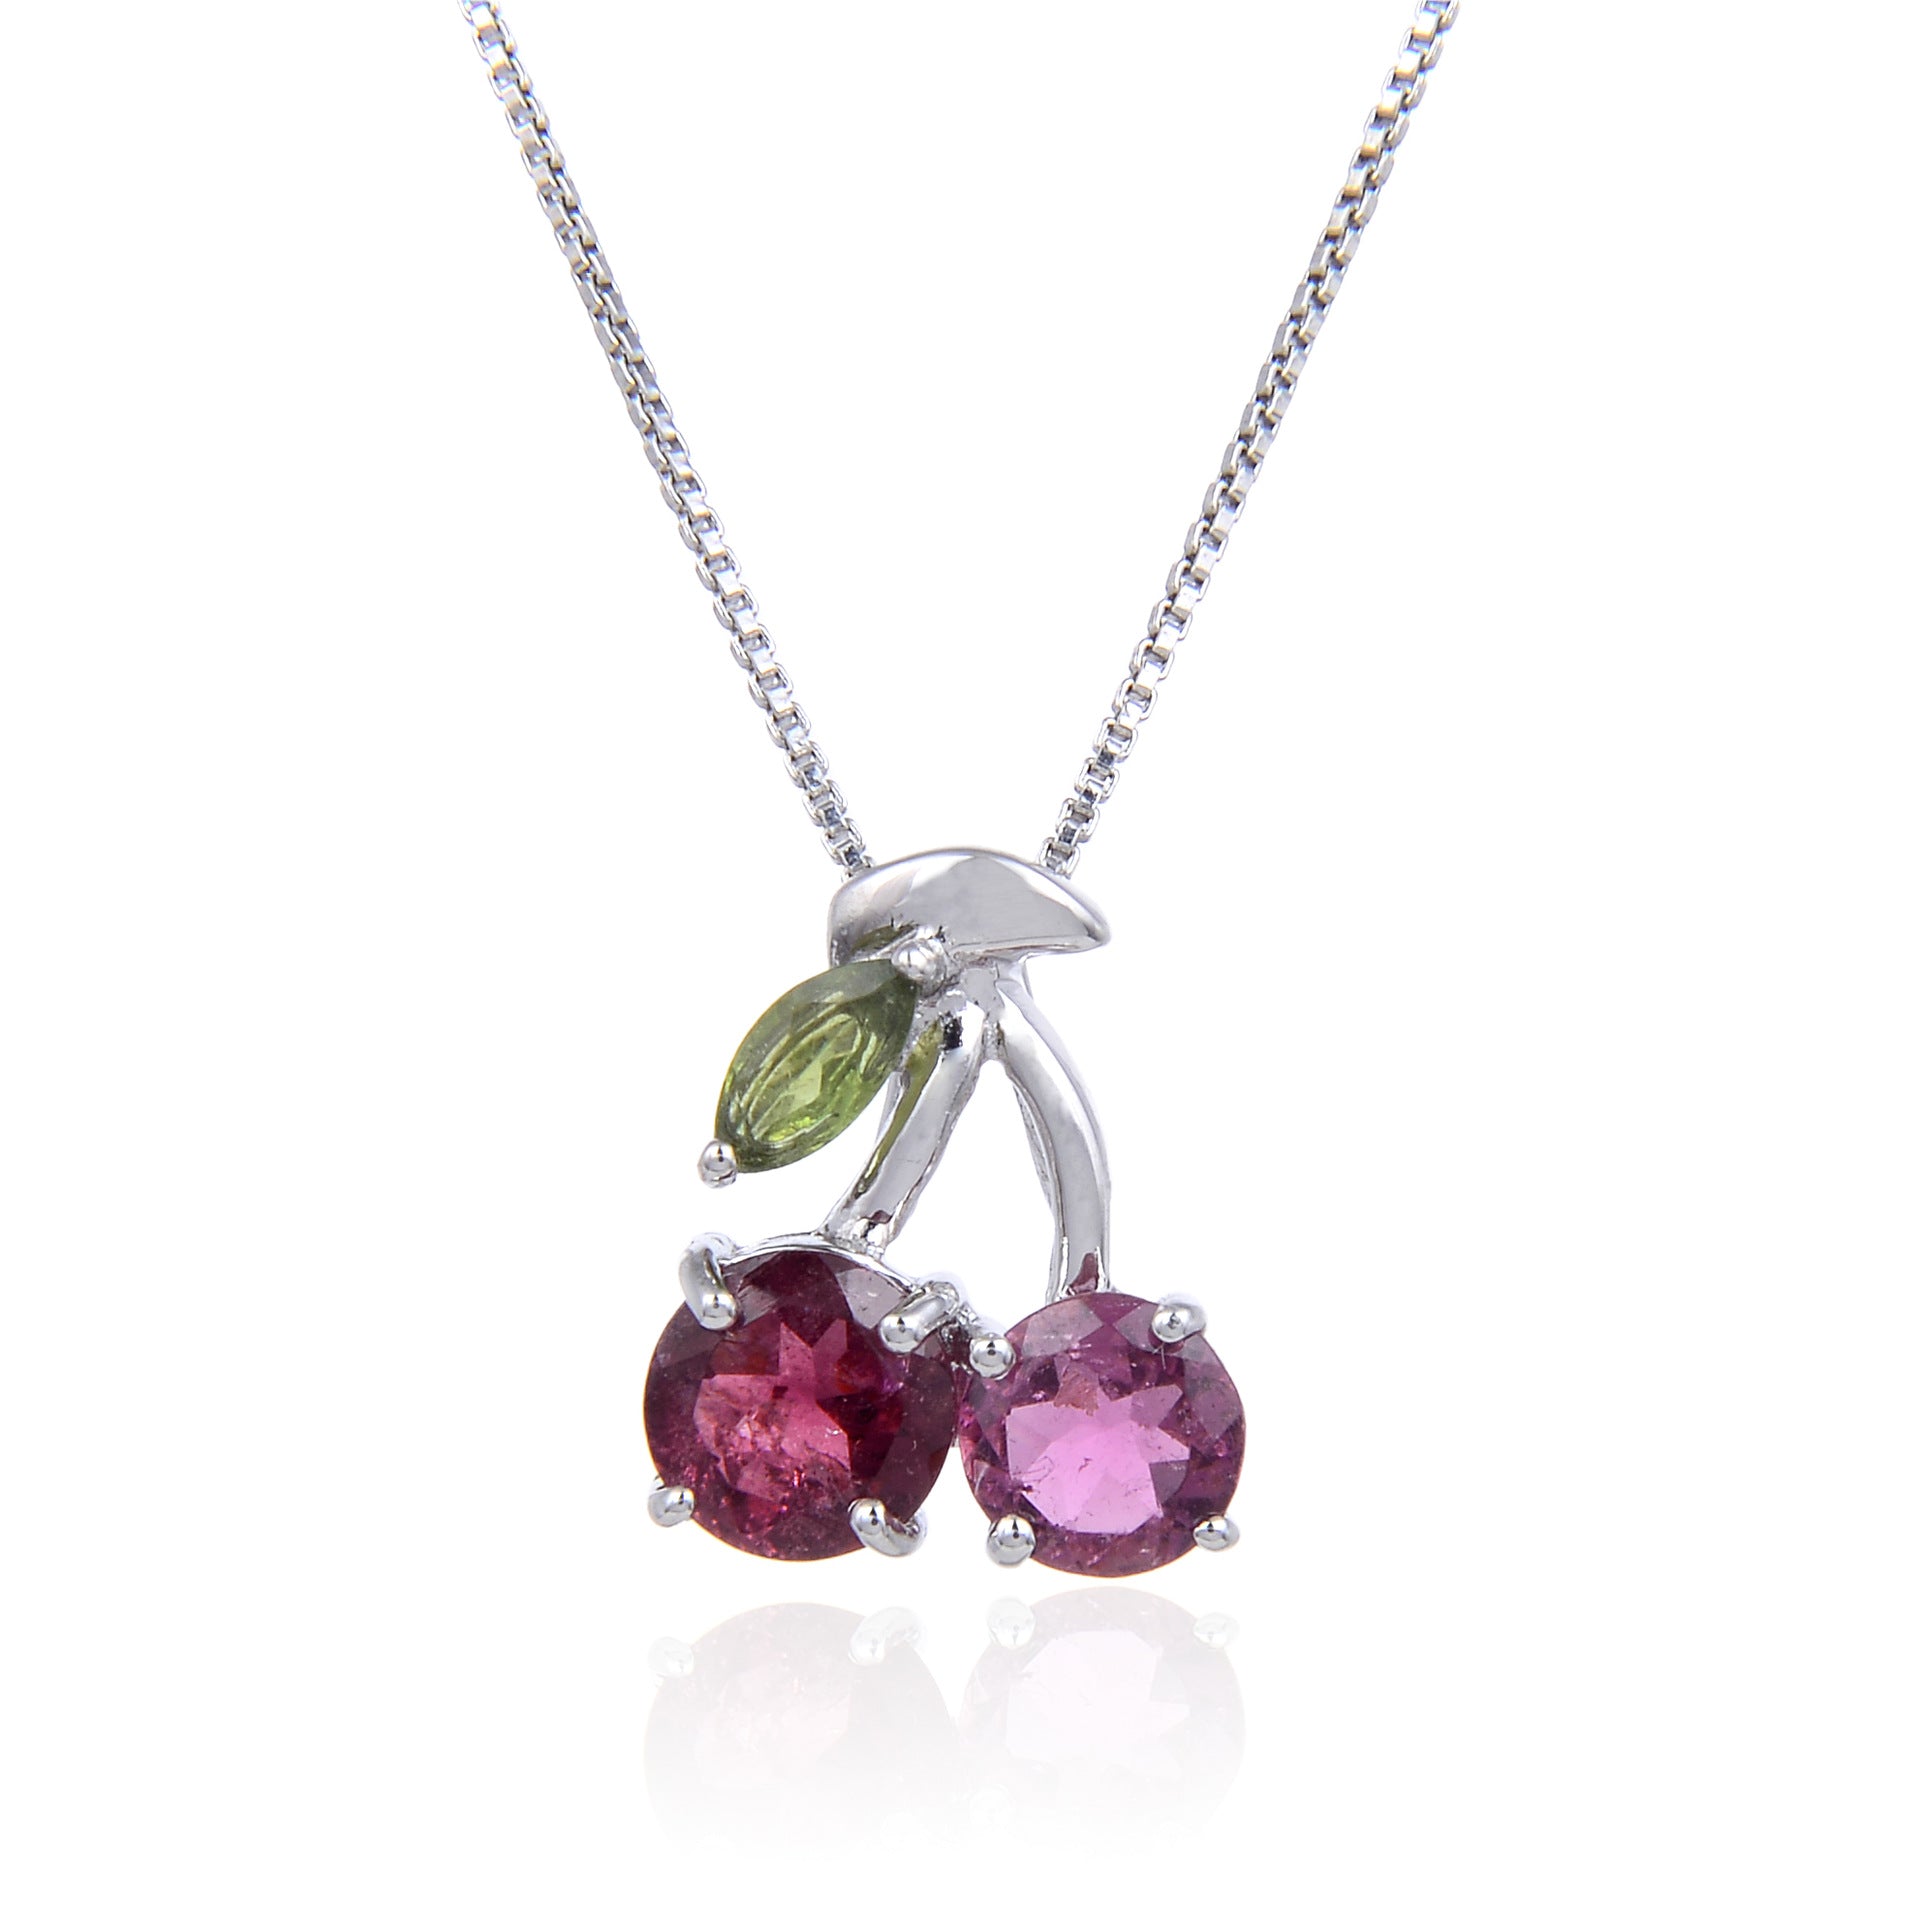 Natural Colourful Gemstone Cherry Pendant Silver Necklace Pendant for Women